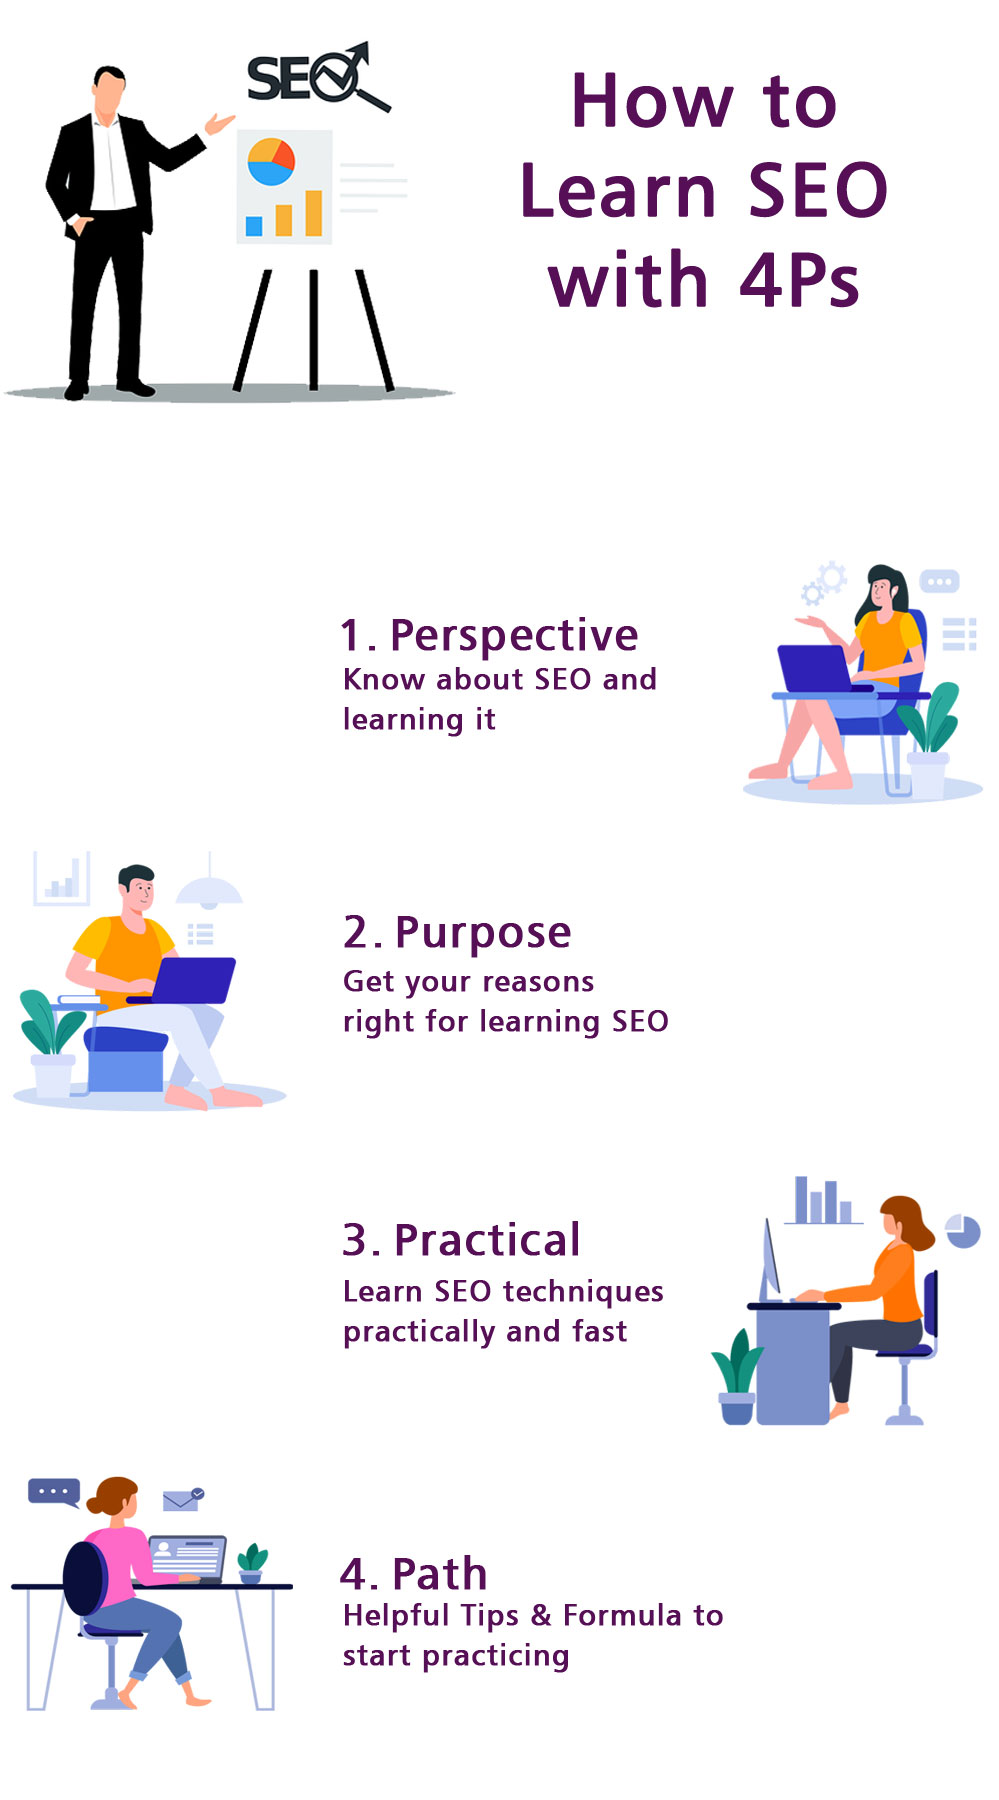 Best way to Learn SEO 4Ps Infographic 2022